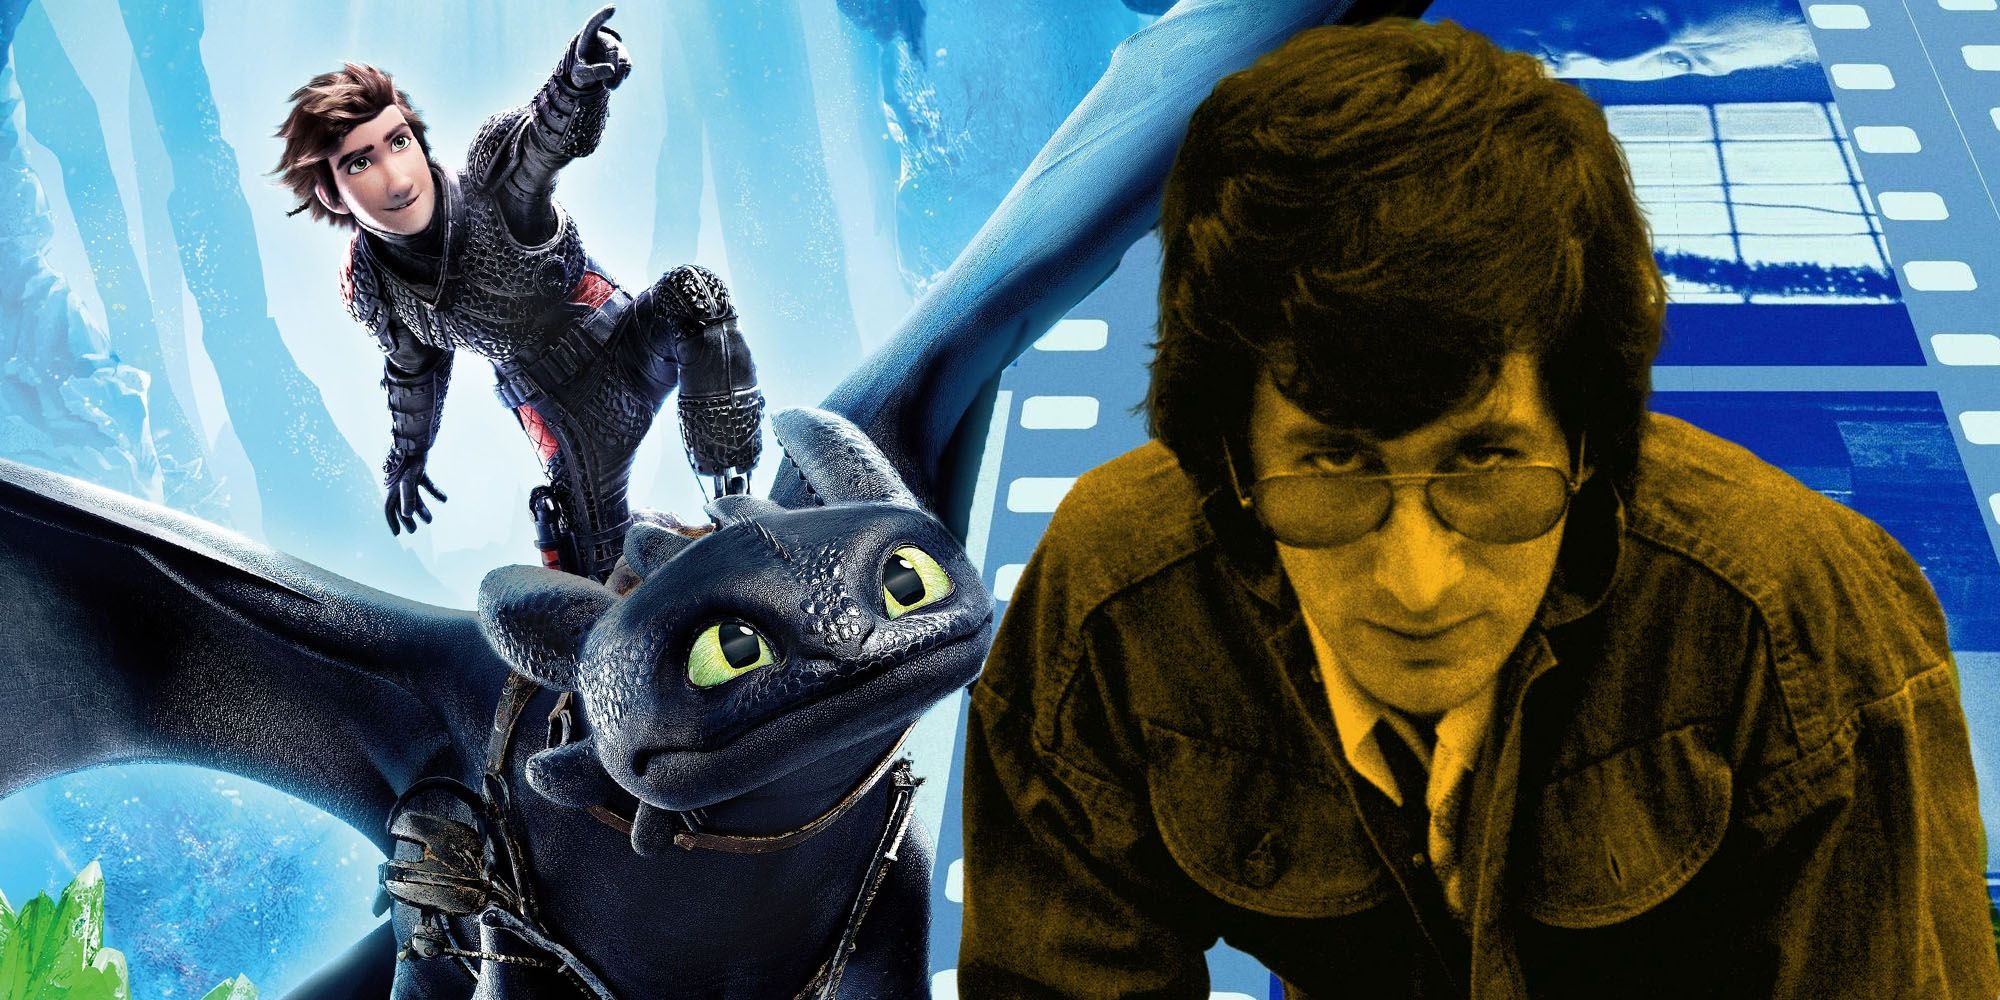 How To Train Your Dragon 3 Hiccup Toothless Steven Spielberg